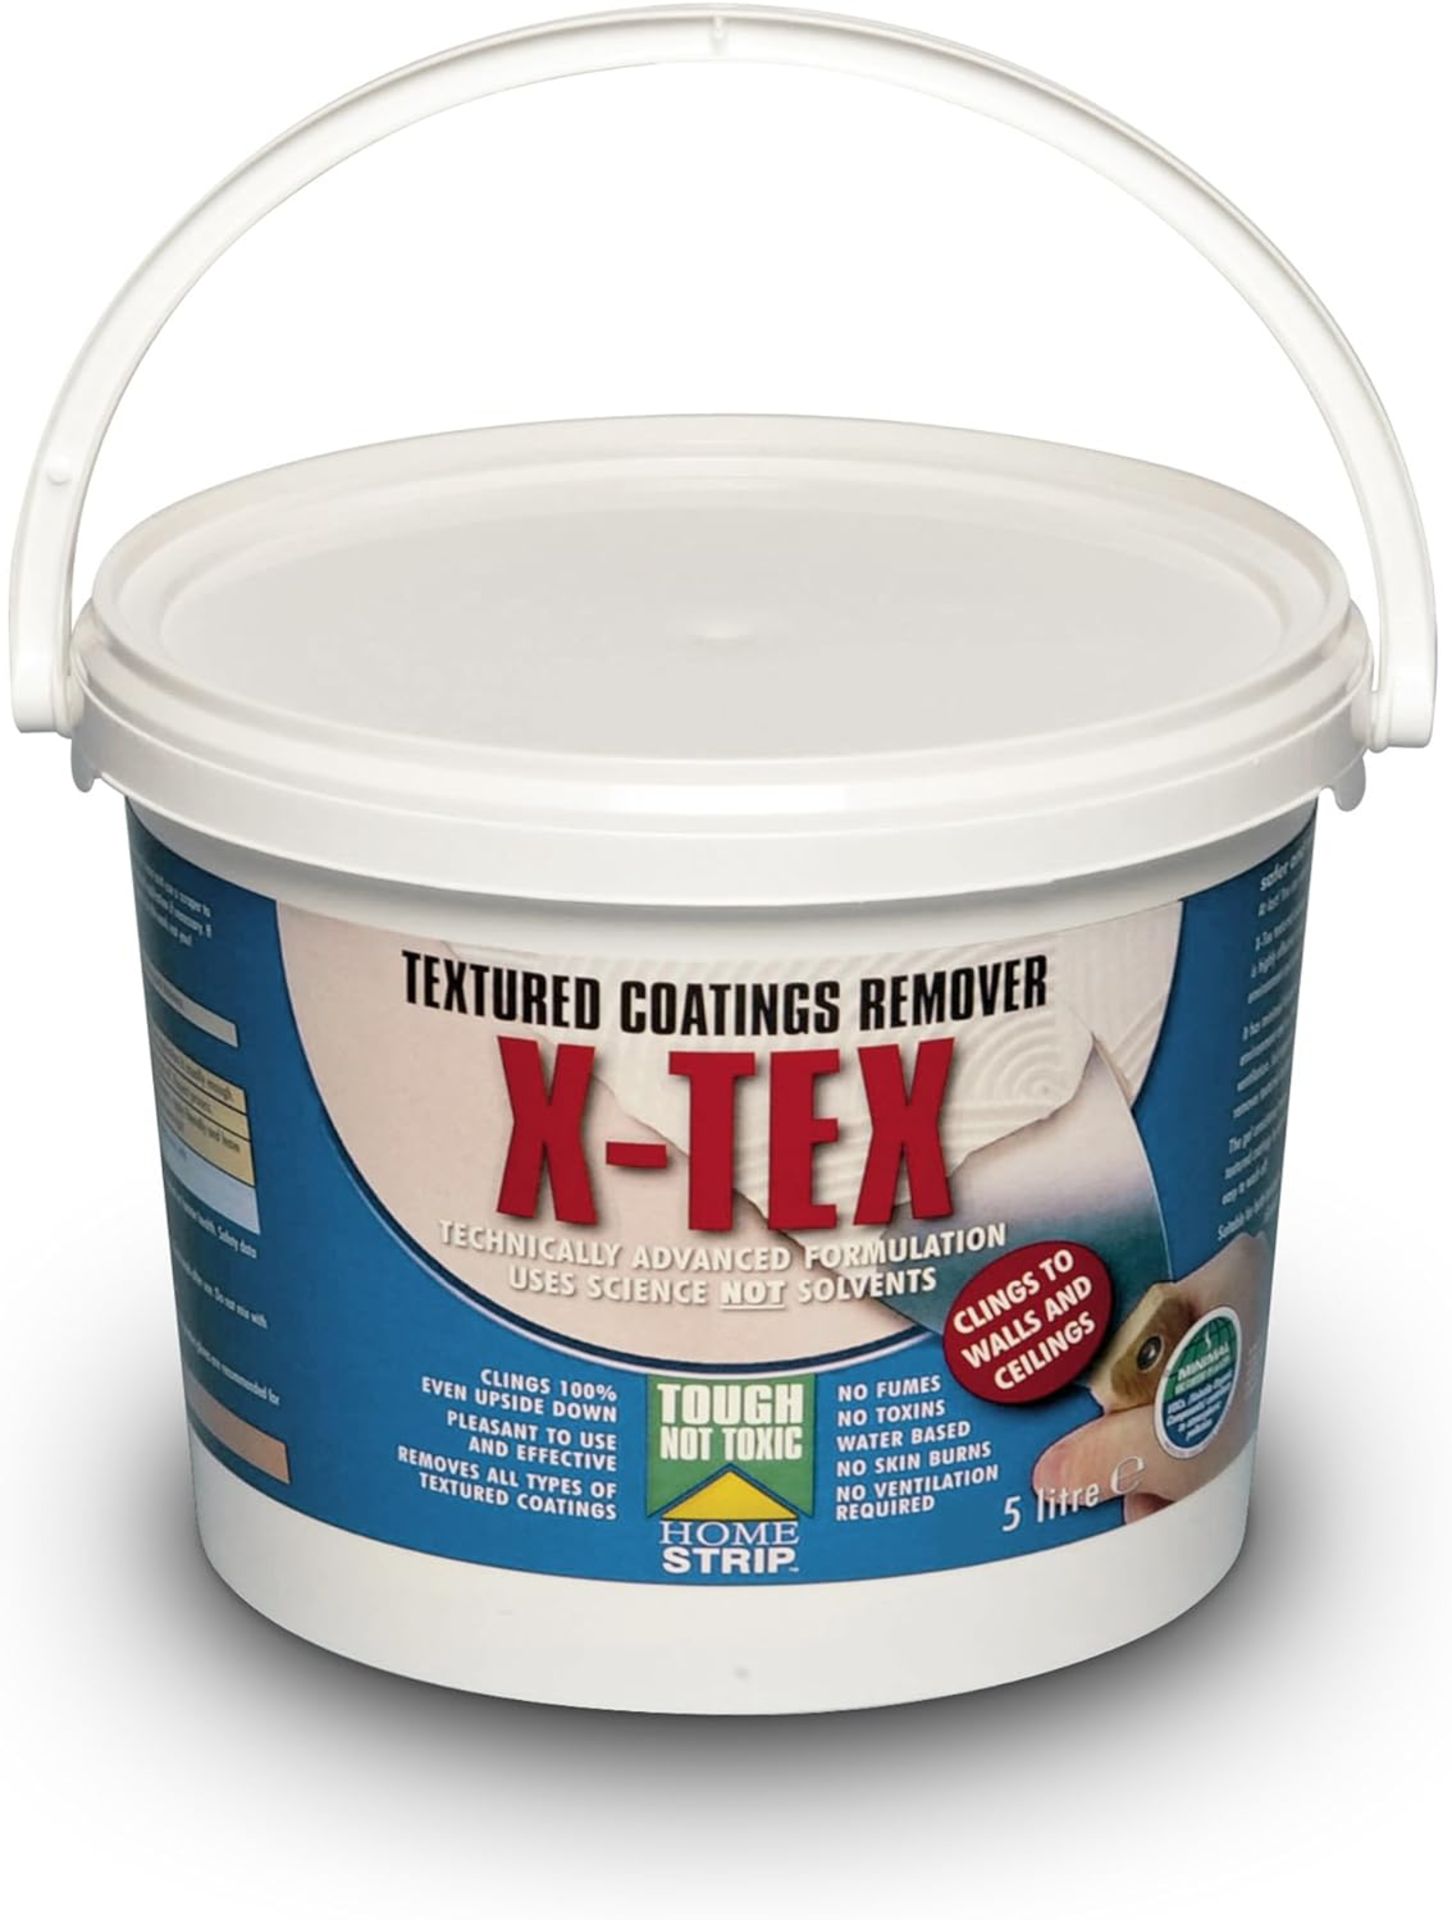 8 X BRAND NEW 5L TUBS OF X-TEX TEXTURED COATINGS REMOVER R15-2